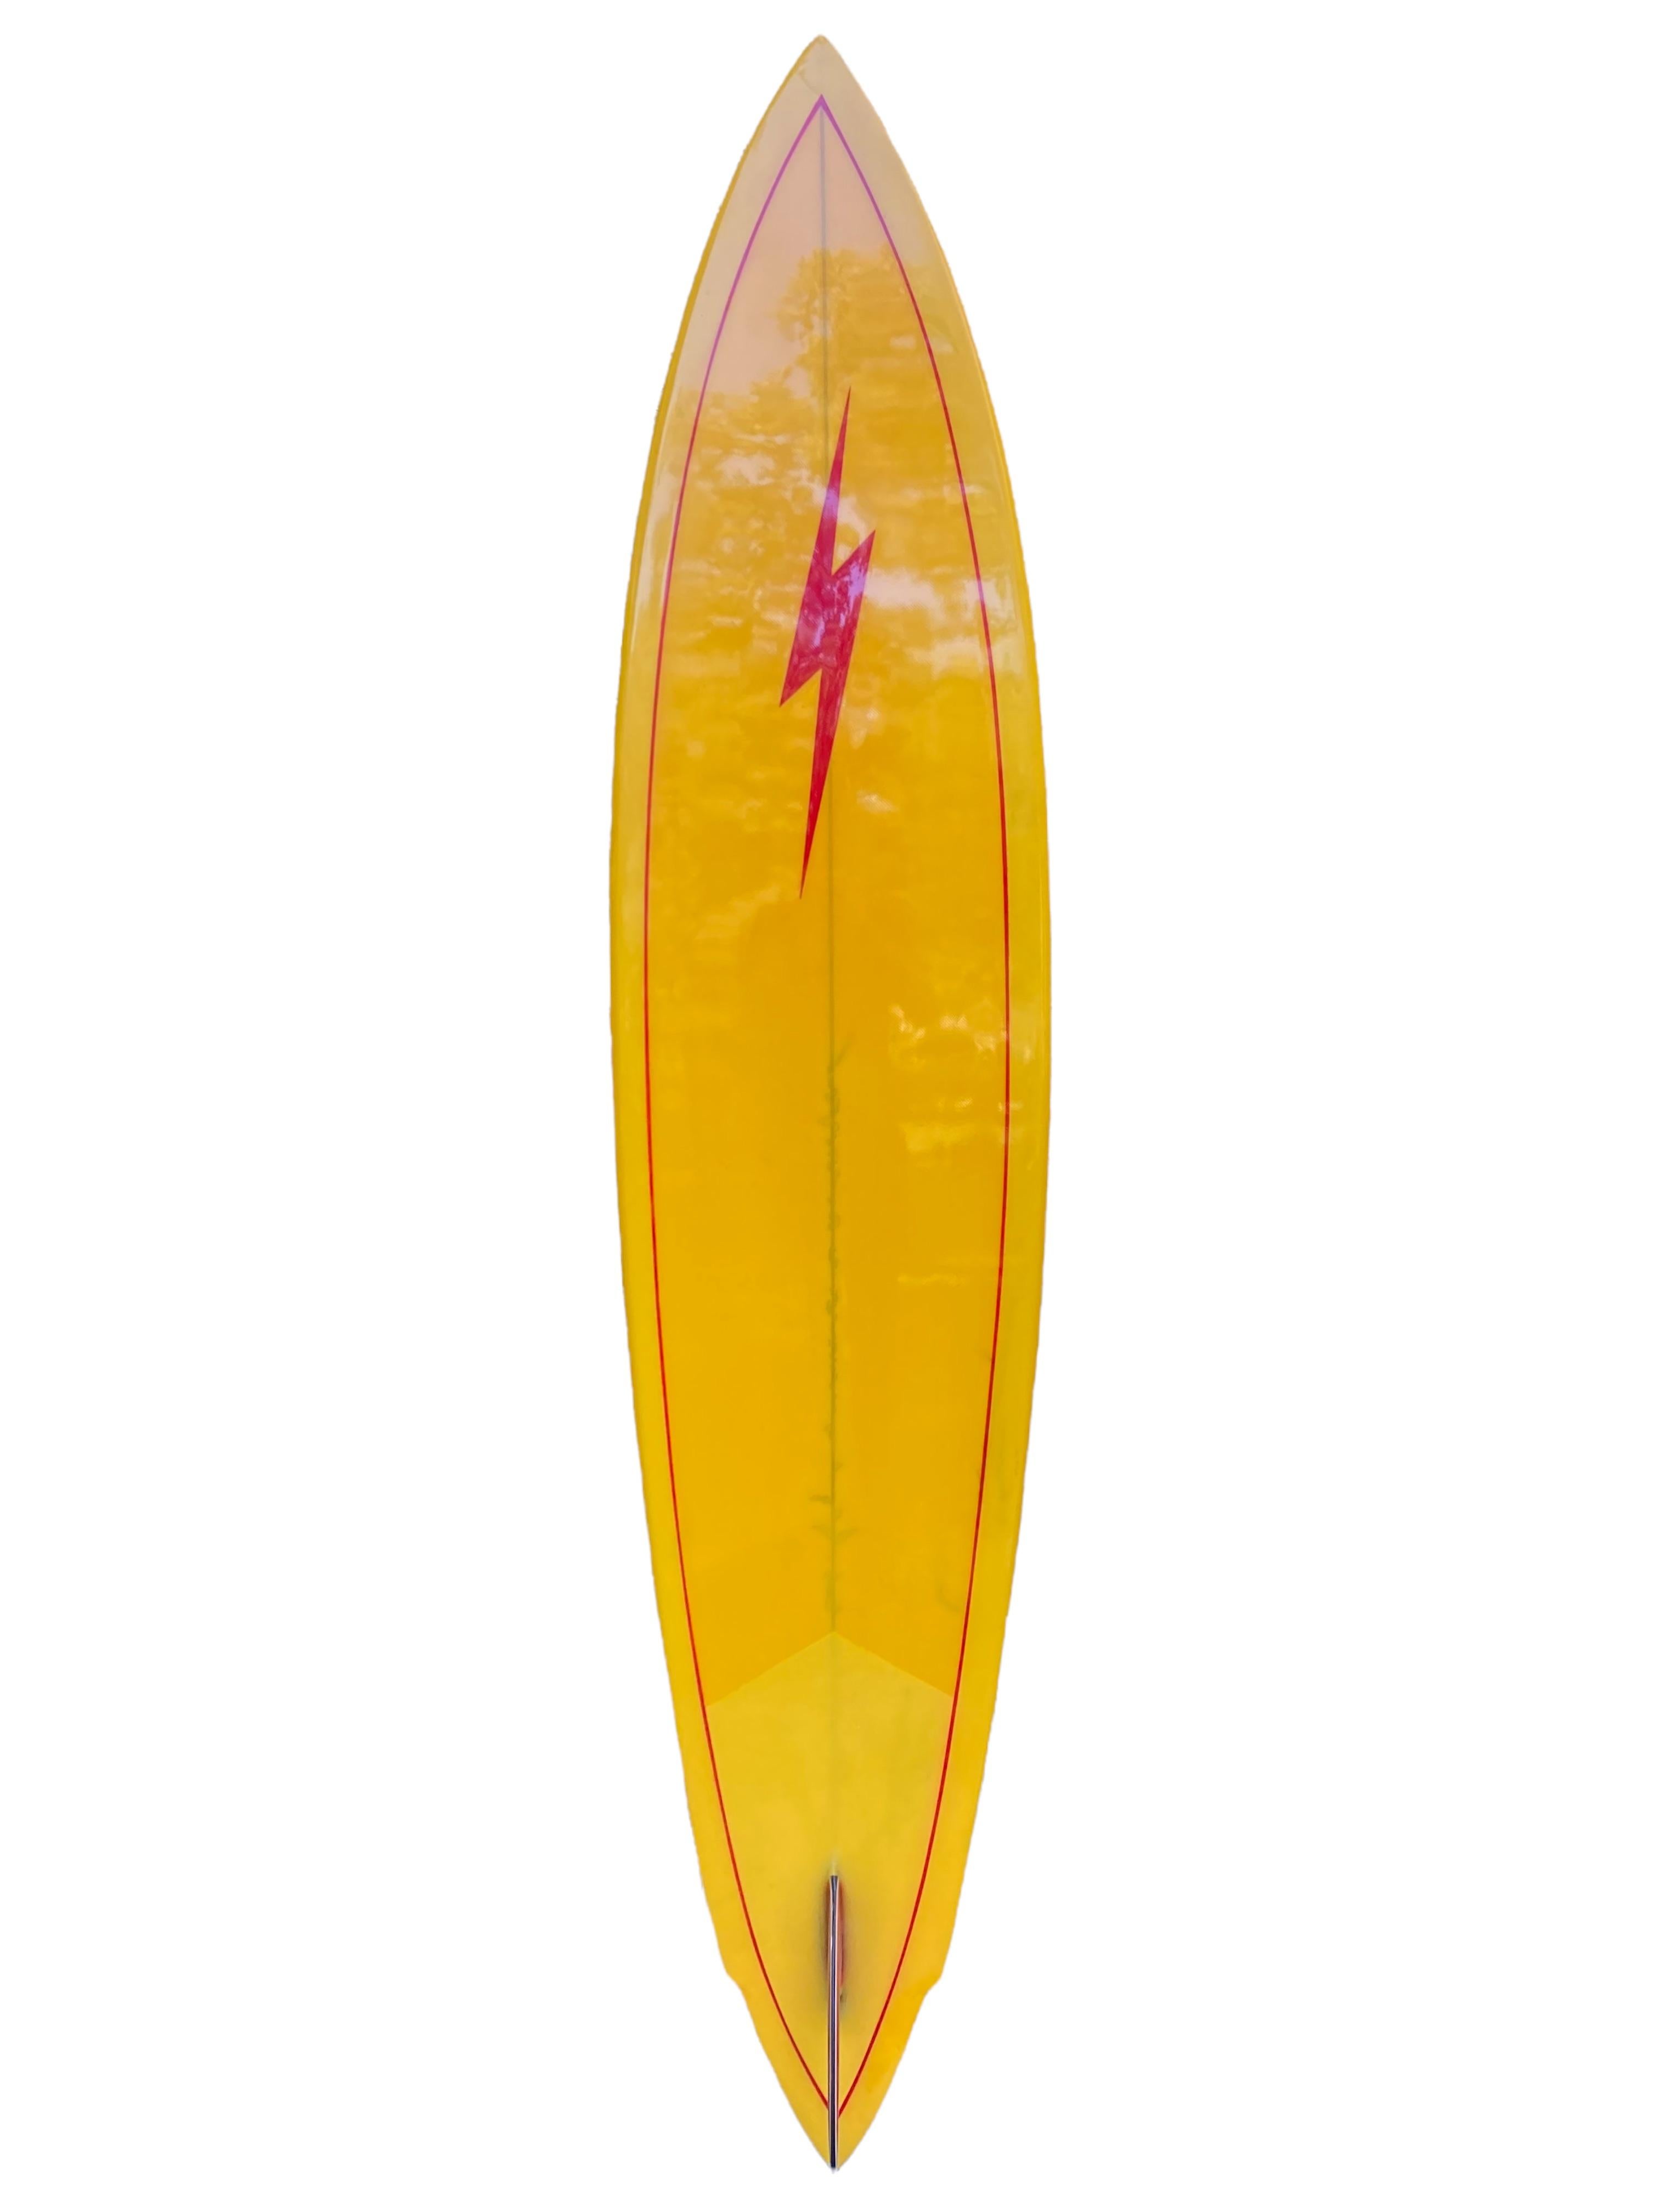 Early-mid 1970s Lightning Bolt Pipeline surfboard shaped by Tom Nellis. Features a vibrant yellow tint and contrasting black lighting bolt jag design with matching black rail lighting bolts. Sharp winged-pintail shape with stunning 5-color glass-on